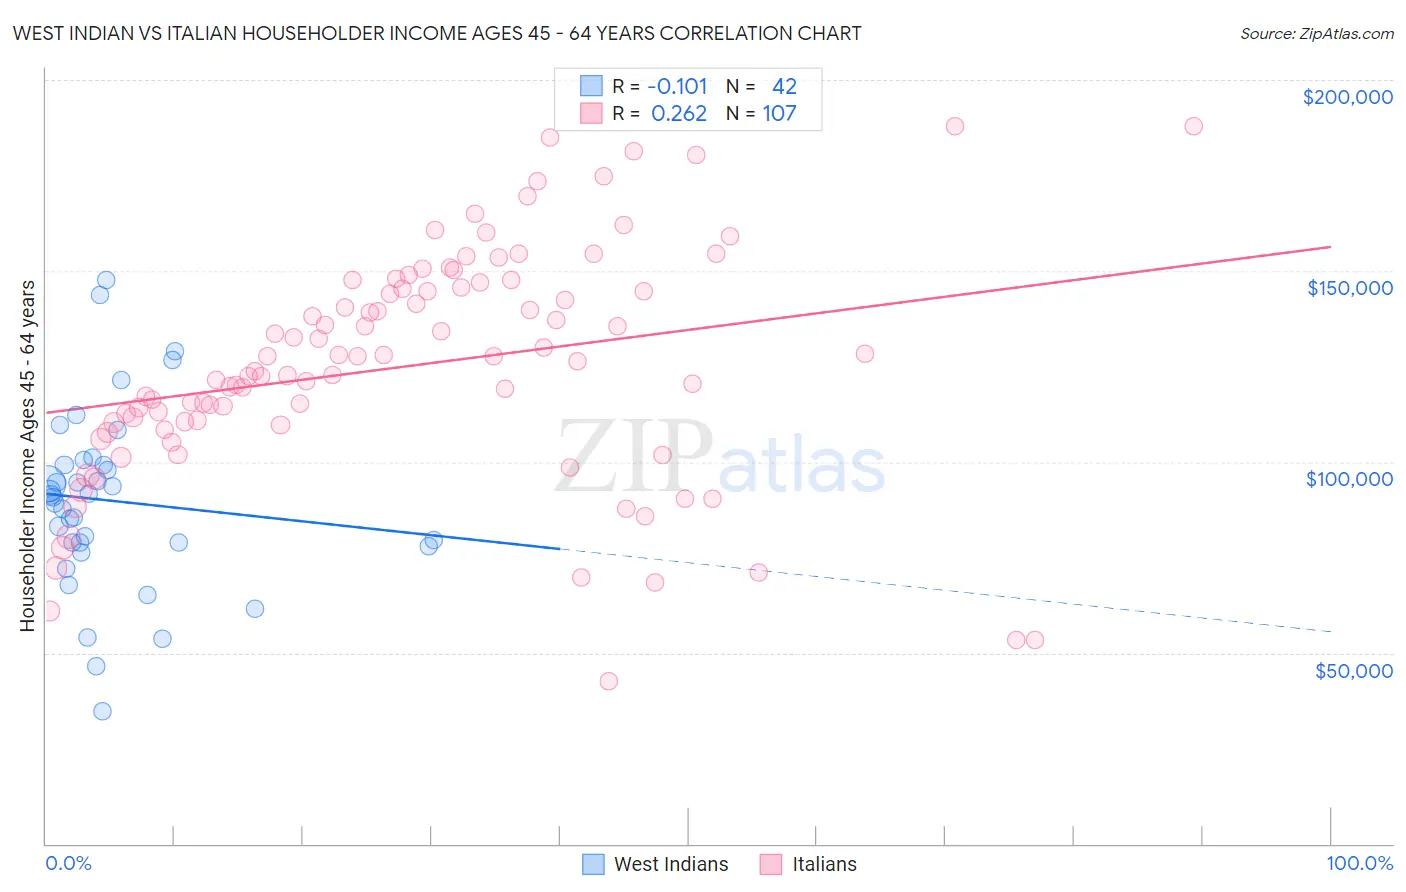 West Indian vs Italian Householder Income Ages 45 - 64 years